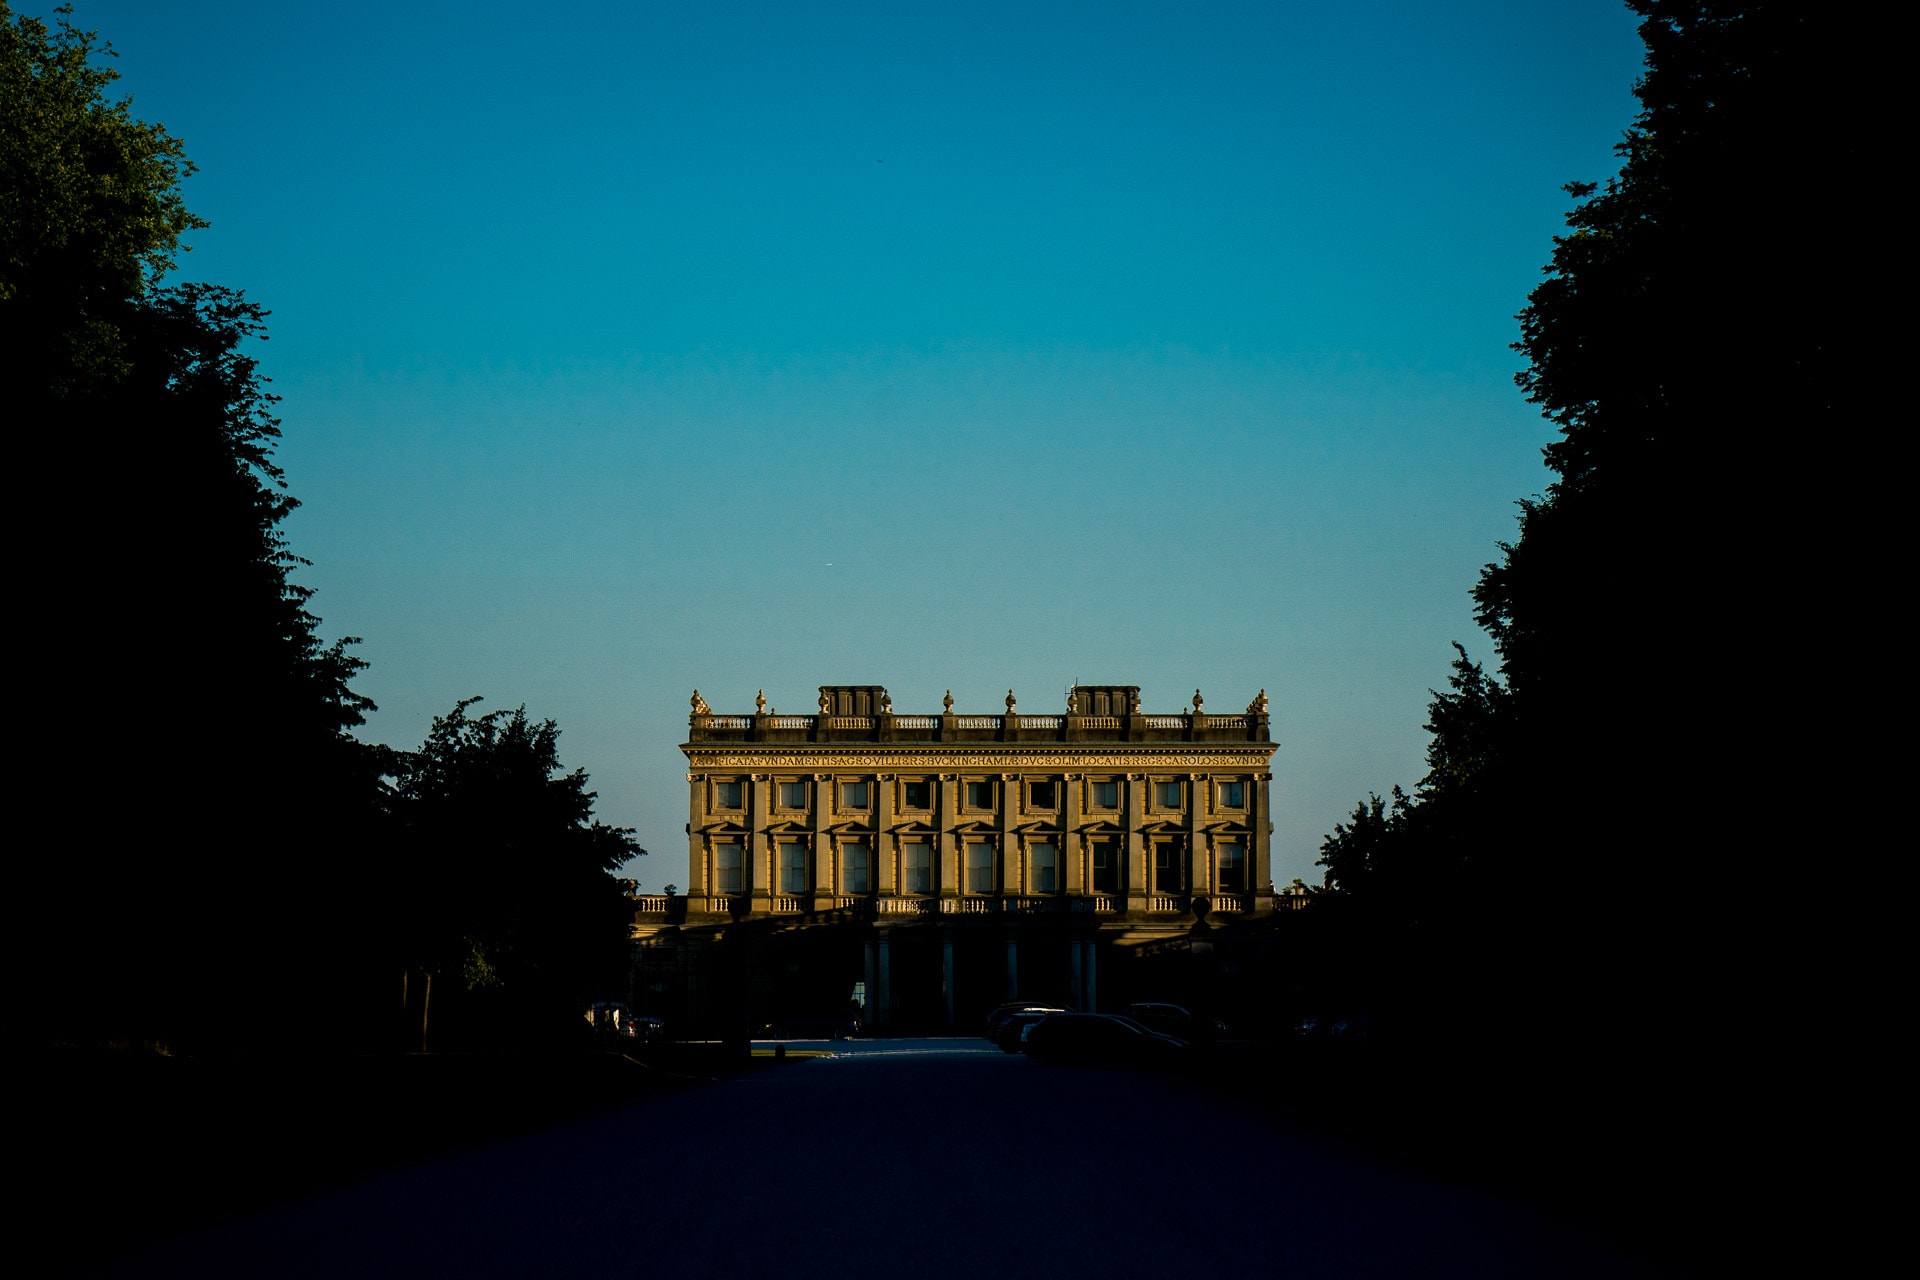 Cliveden House in late sun